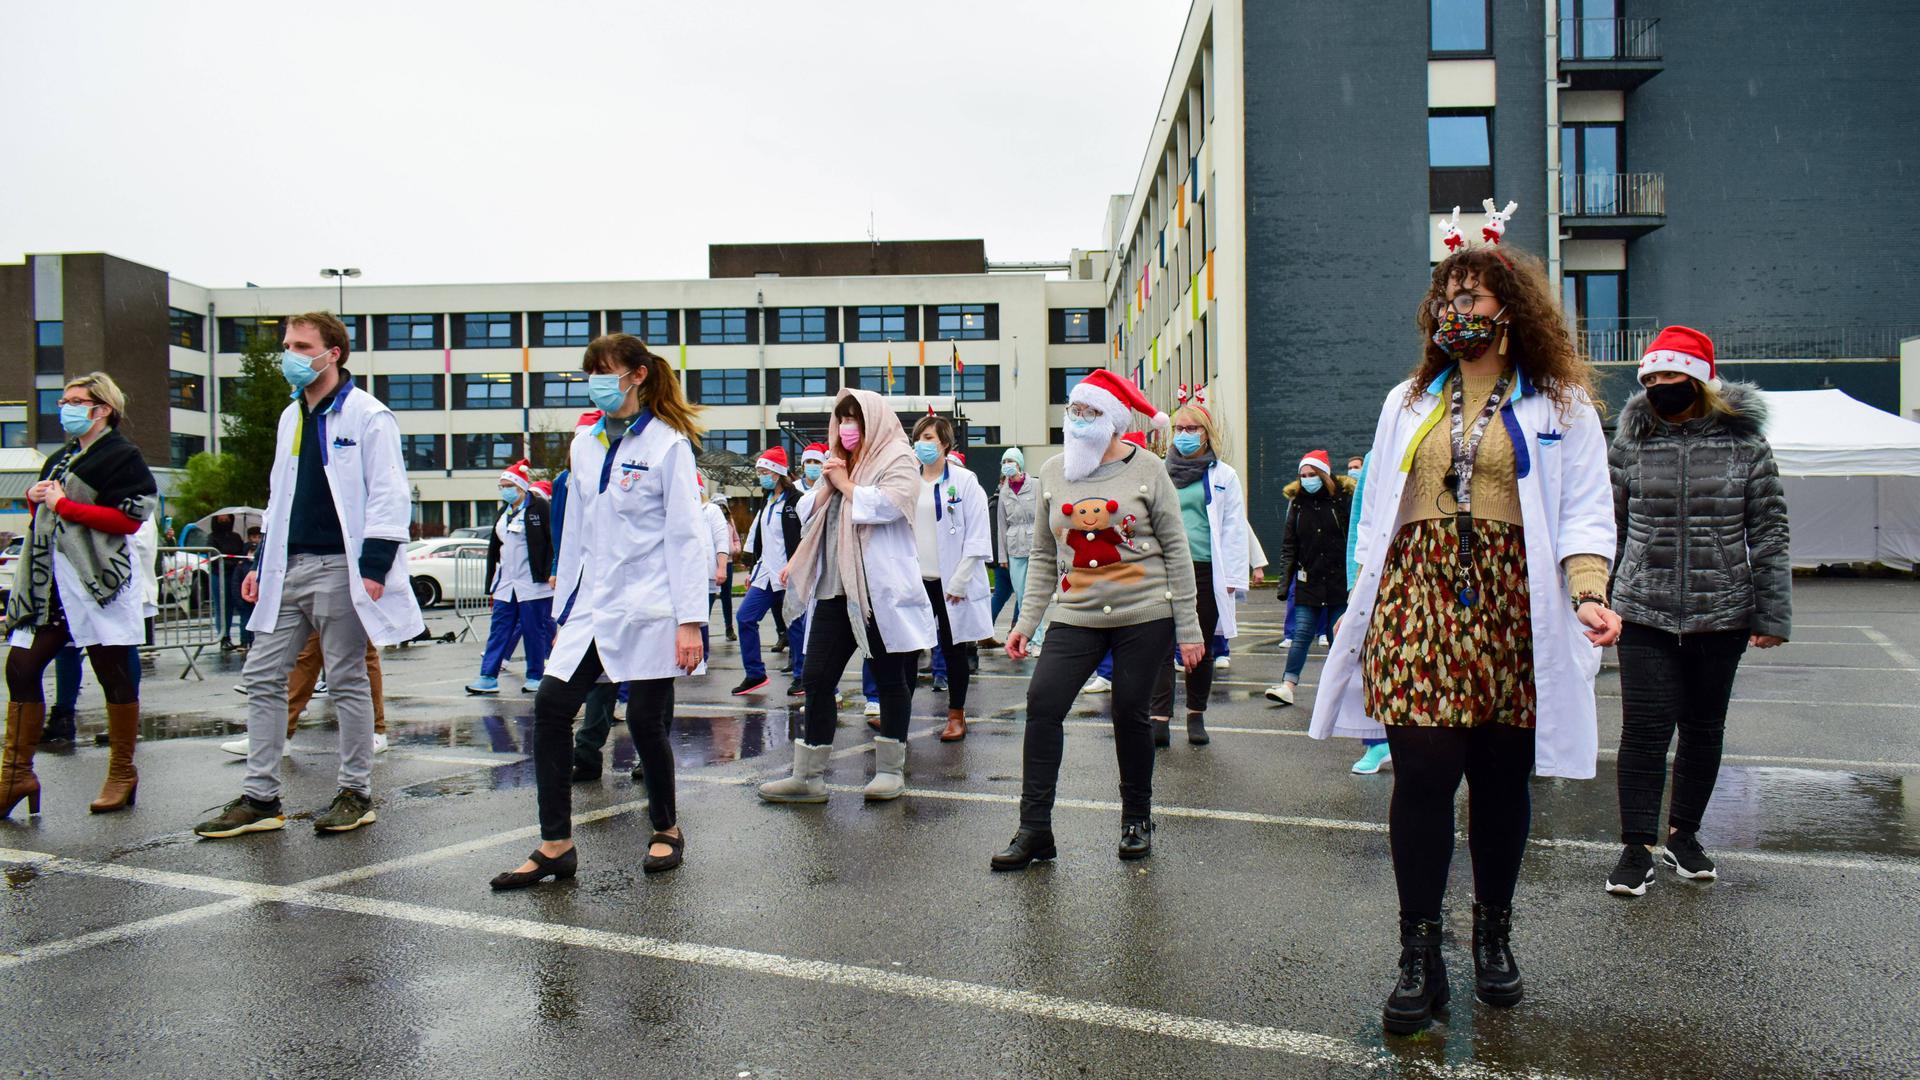 Illustration picture shows a flash-mob dancing moment on Jerusalema of the staff of the CHR Sambre et Meuse hospital in Sambreville, Monday 21 December 2020. PUBLICATIONxINxGERxSUIxAUTxONLY MAXIMExASSELBERGHS 2616060 